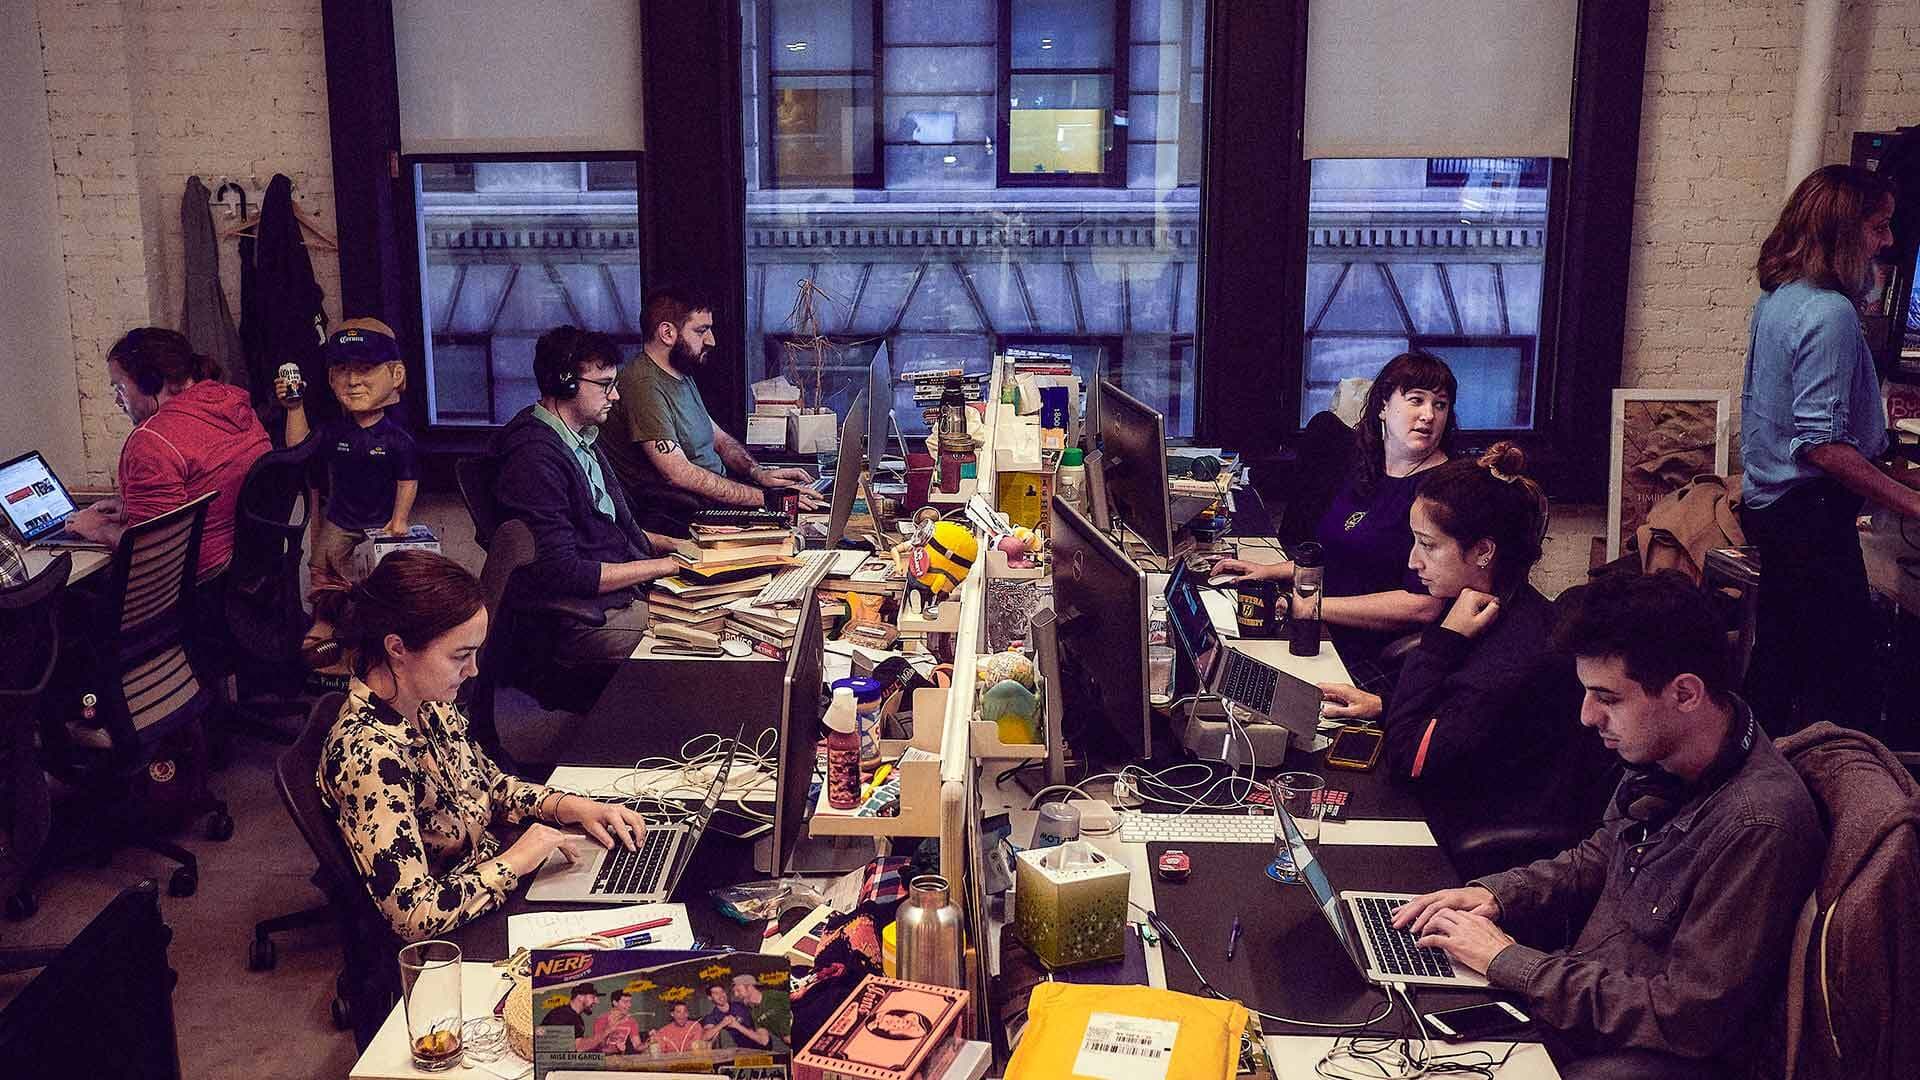 Employees from the website Deadspin work in their New York office last November.